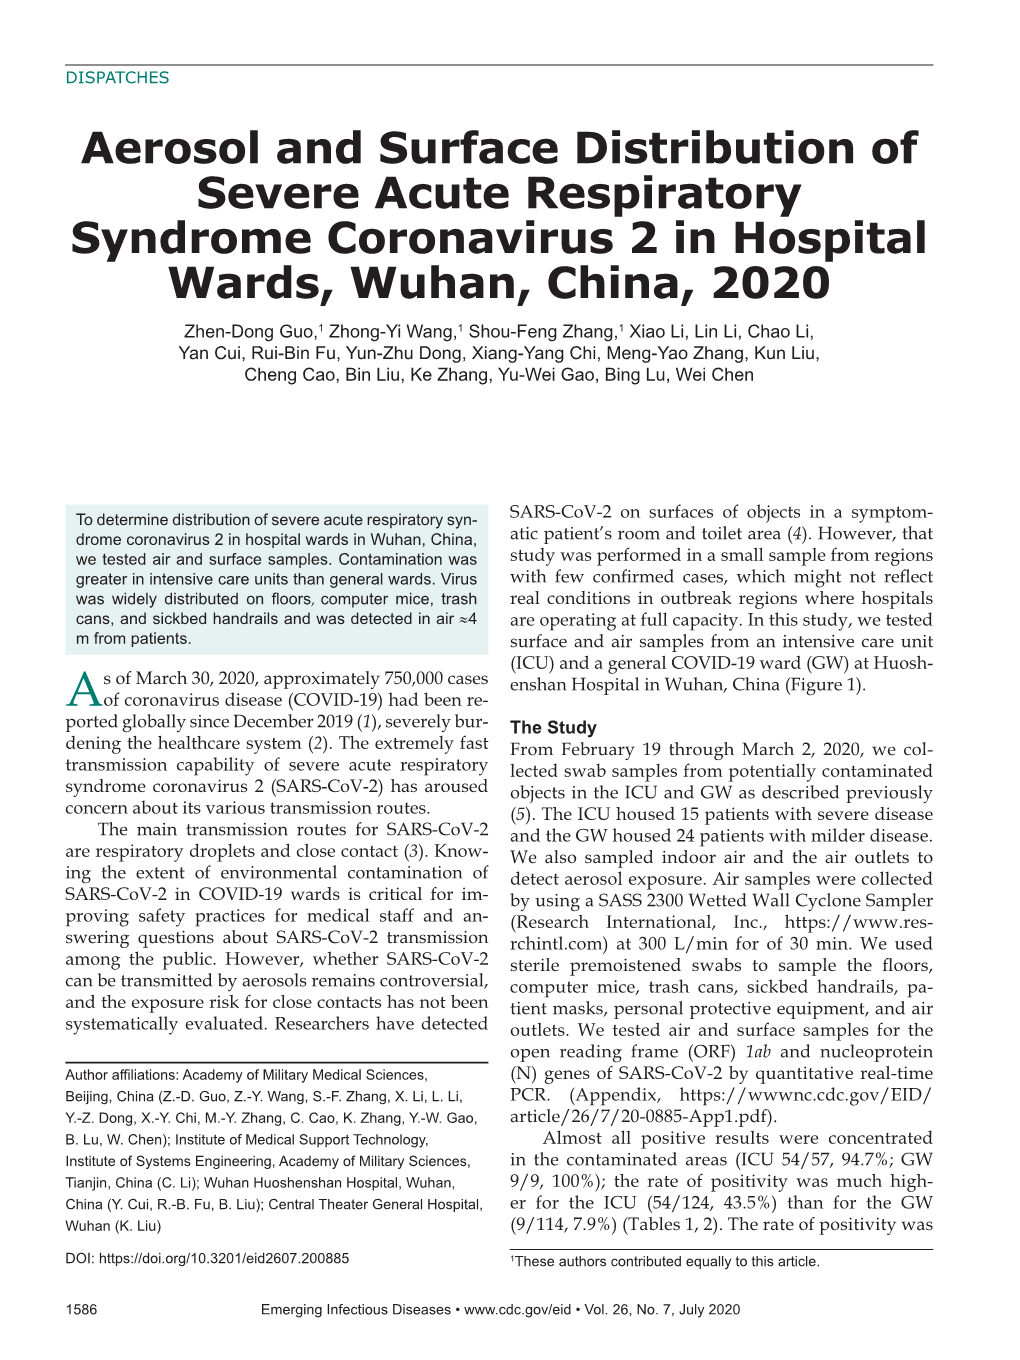 Aerosol and Surface Distribution of Severe Acute Respiratory